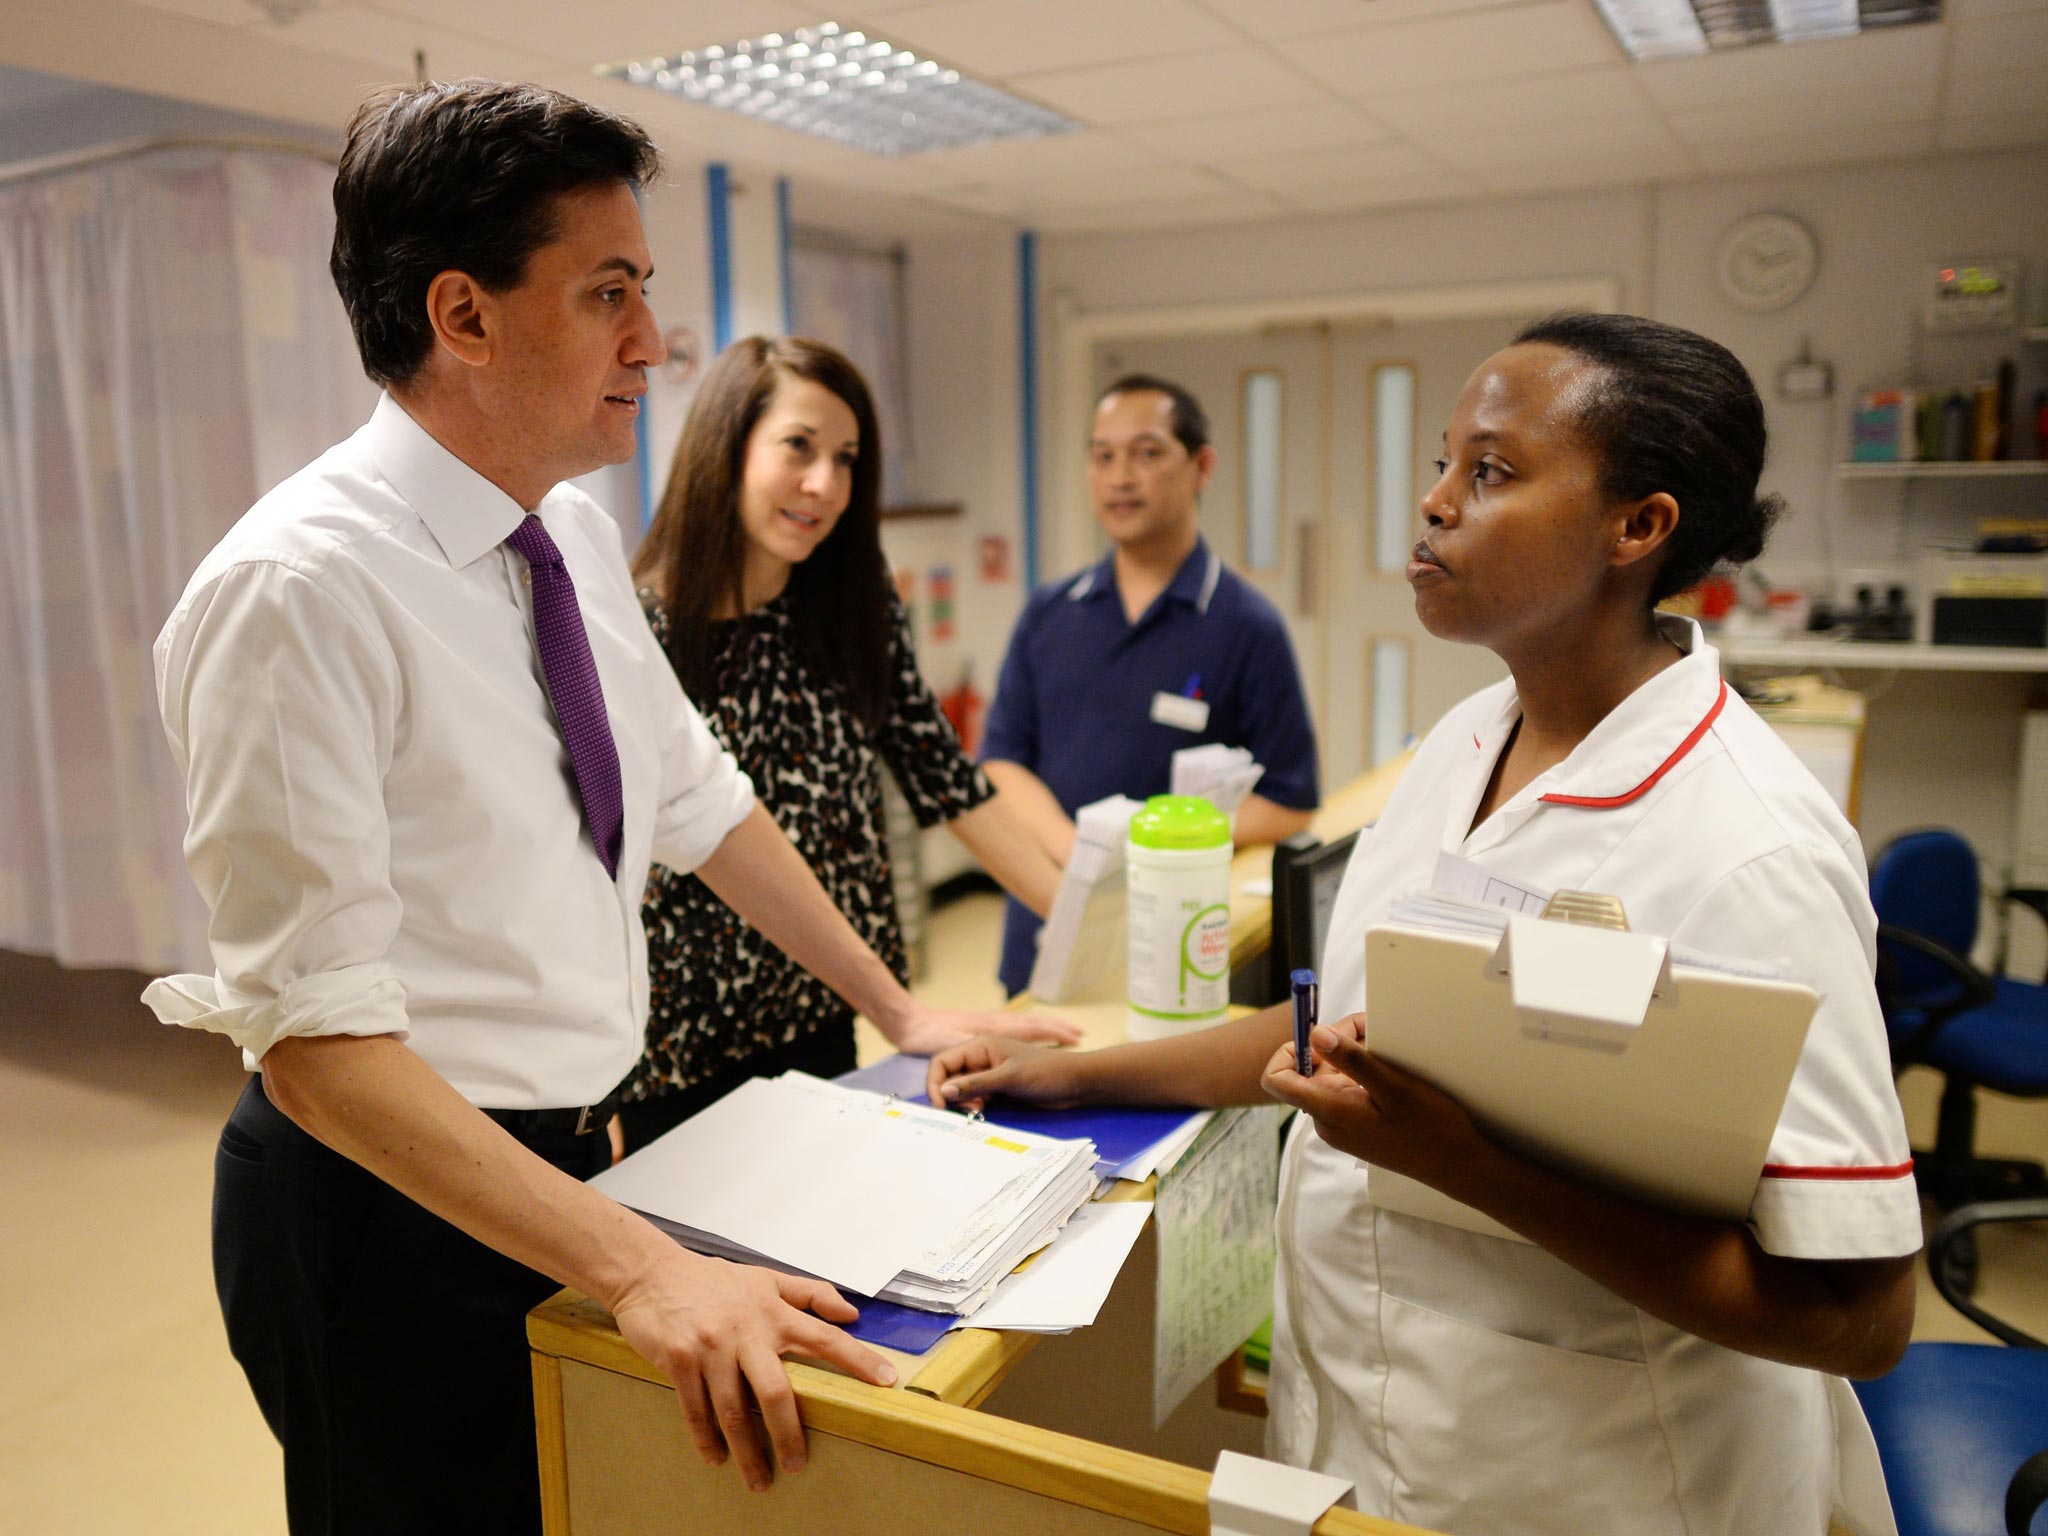 Labour leader Ed Miliband meets staff at the Whittington Hospital in north London